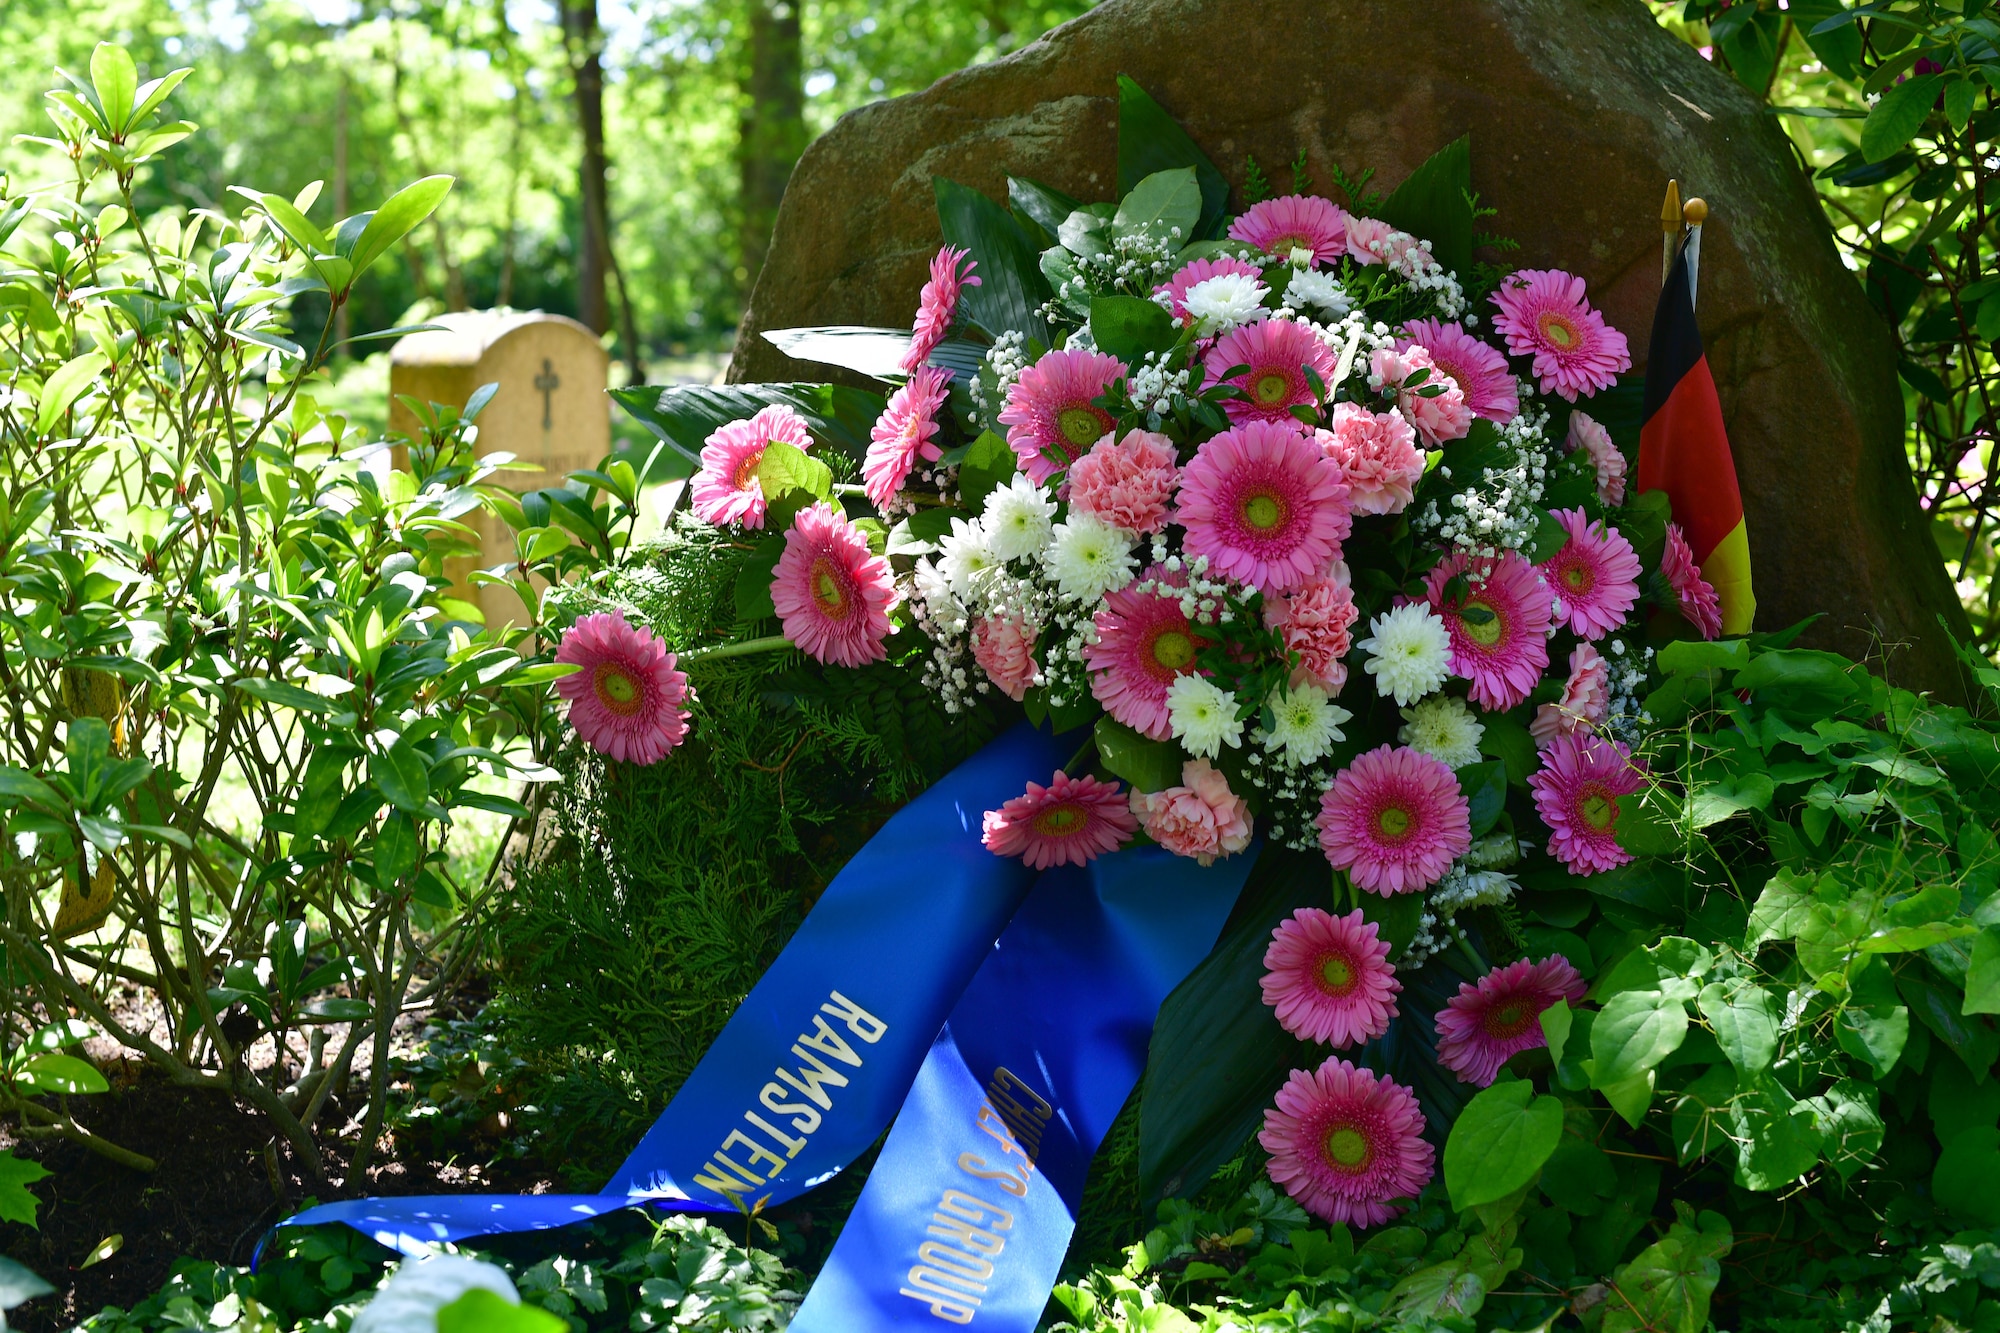 A floral wreath sits in front of a grave site.